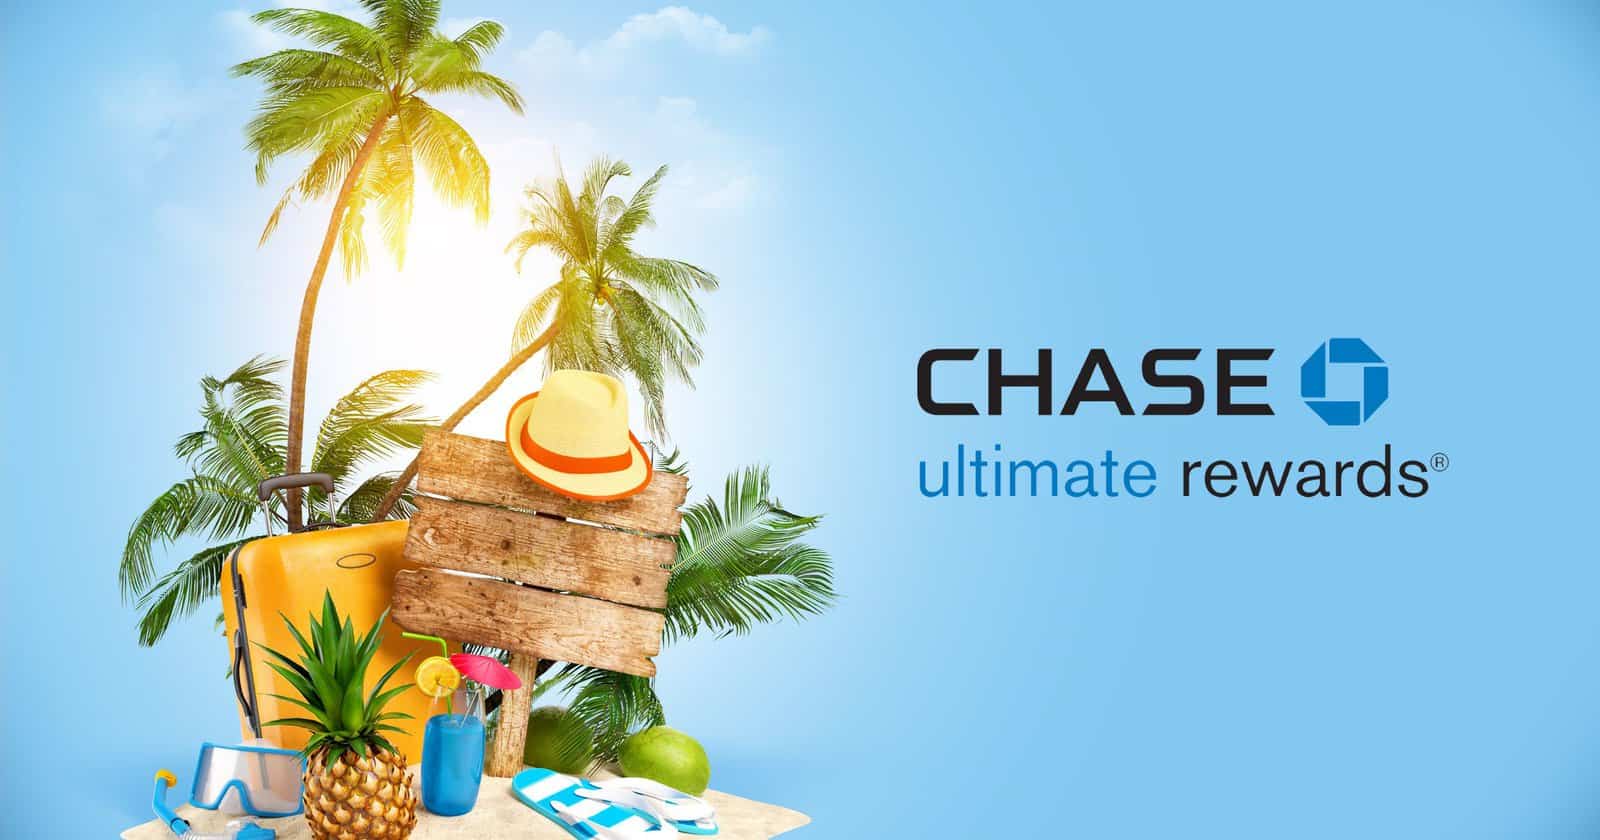 Chase ultimate rewards featured